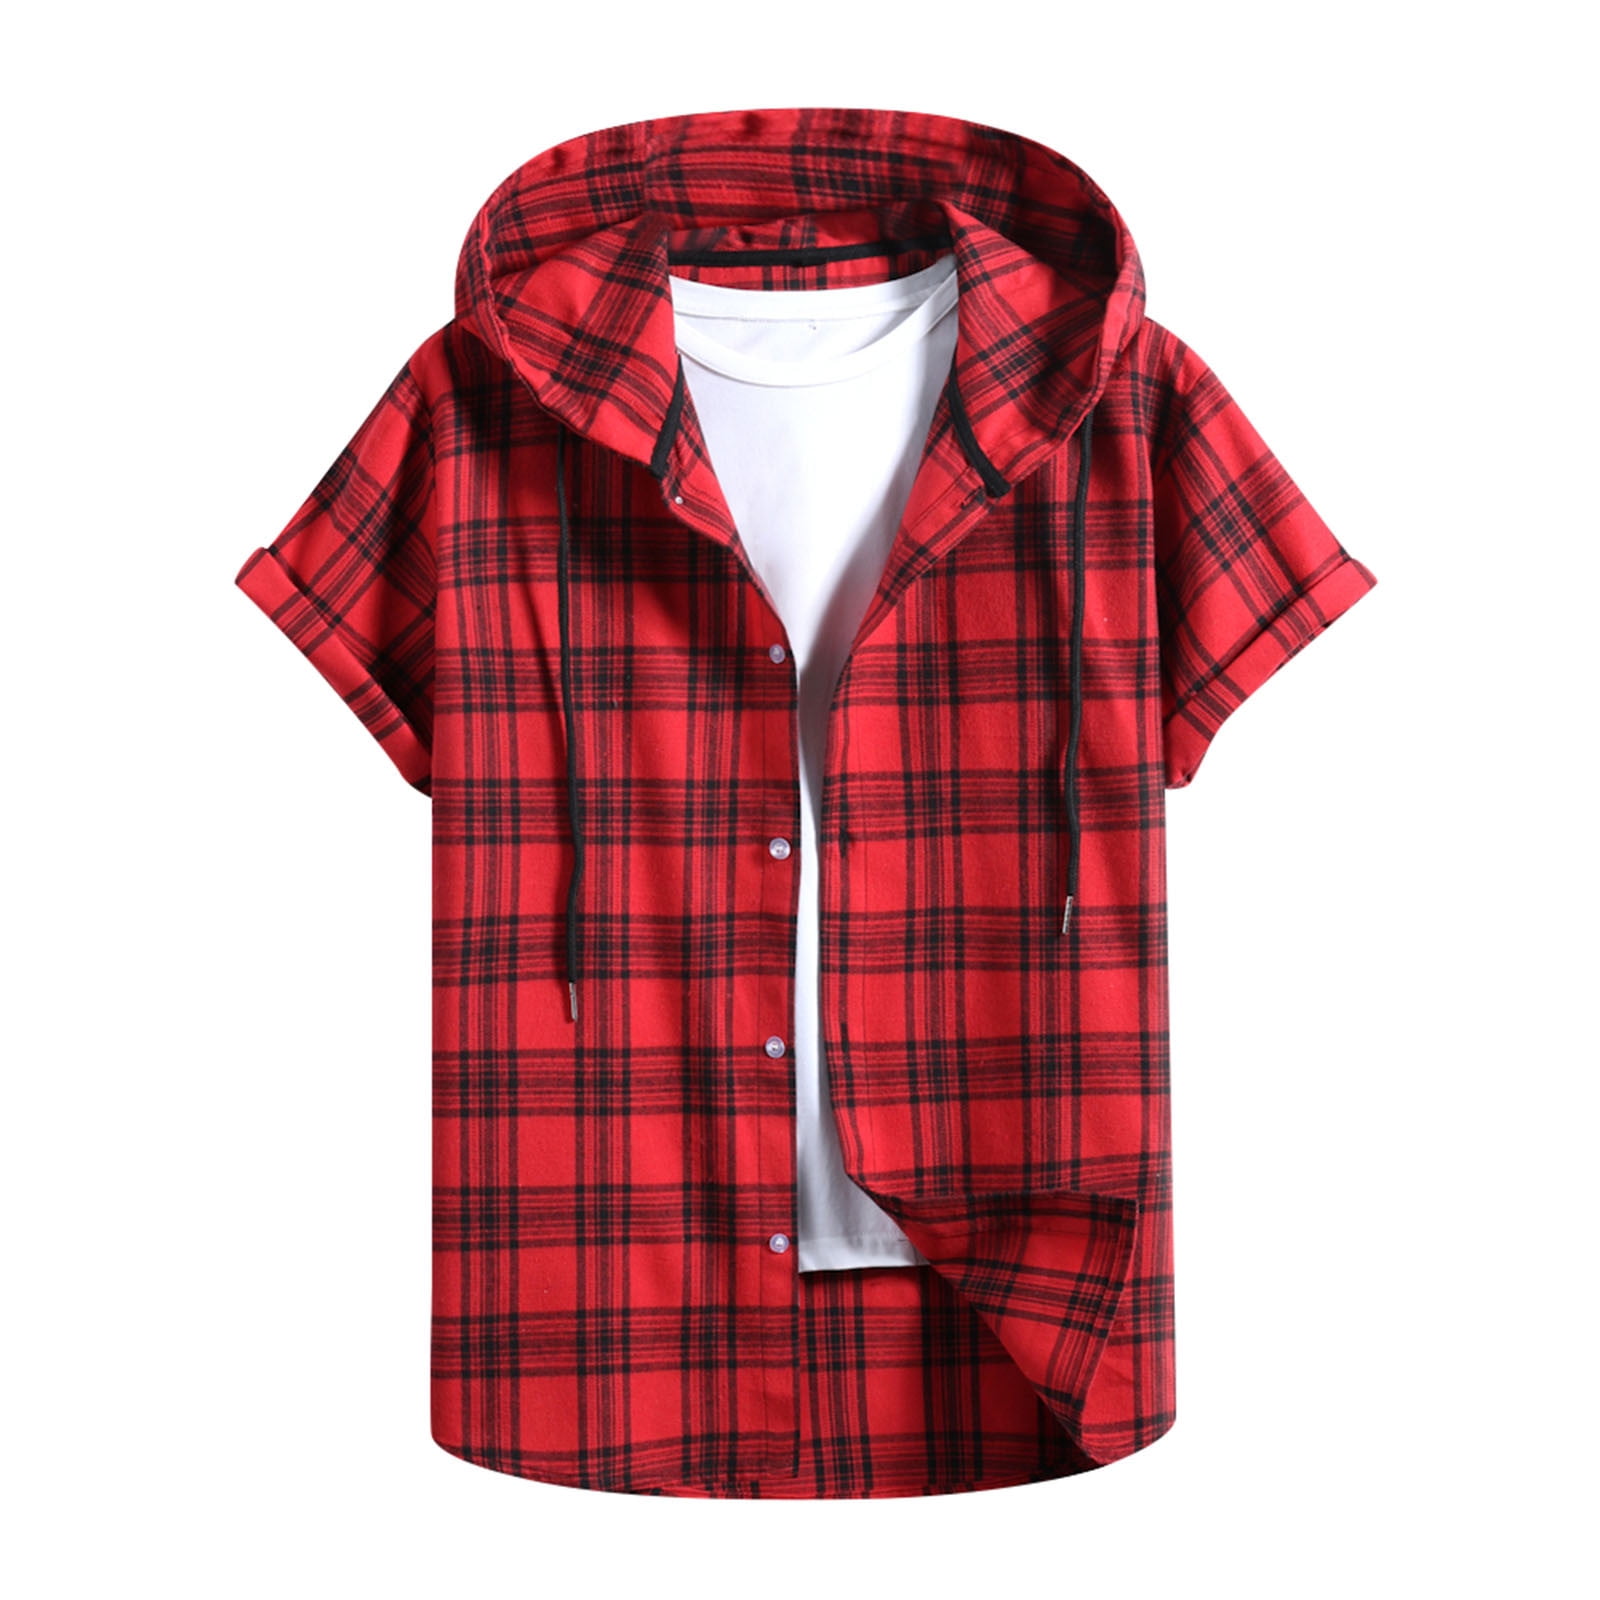 Coolred-Men Patched Hood Summer Active Casual Short-Sleeve Top Shirt 